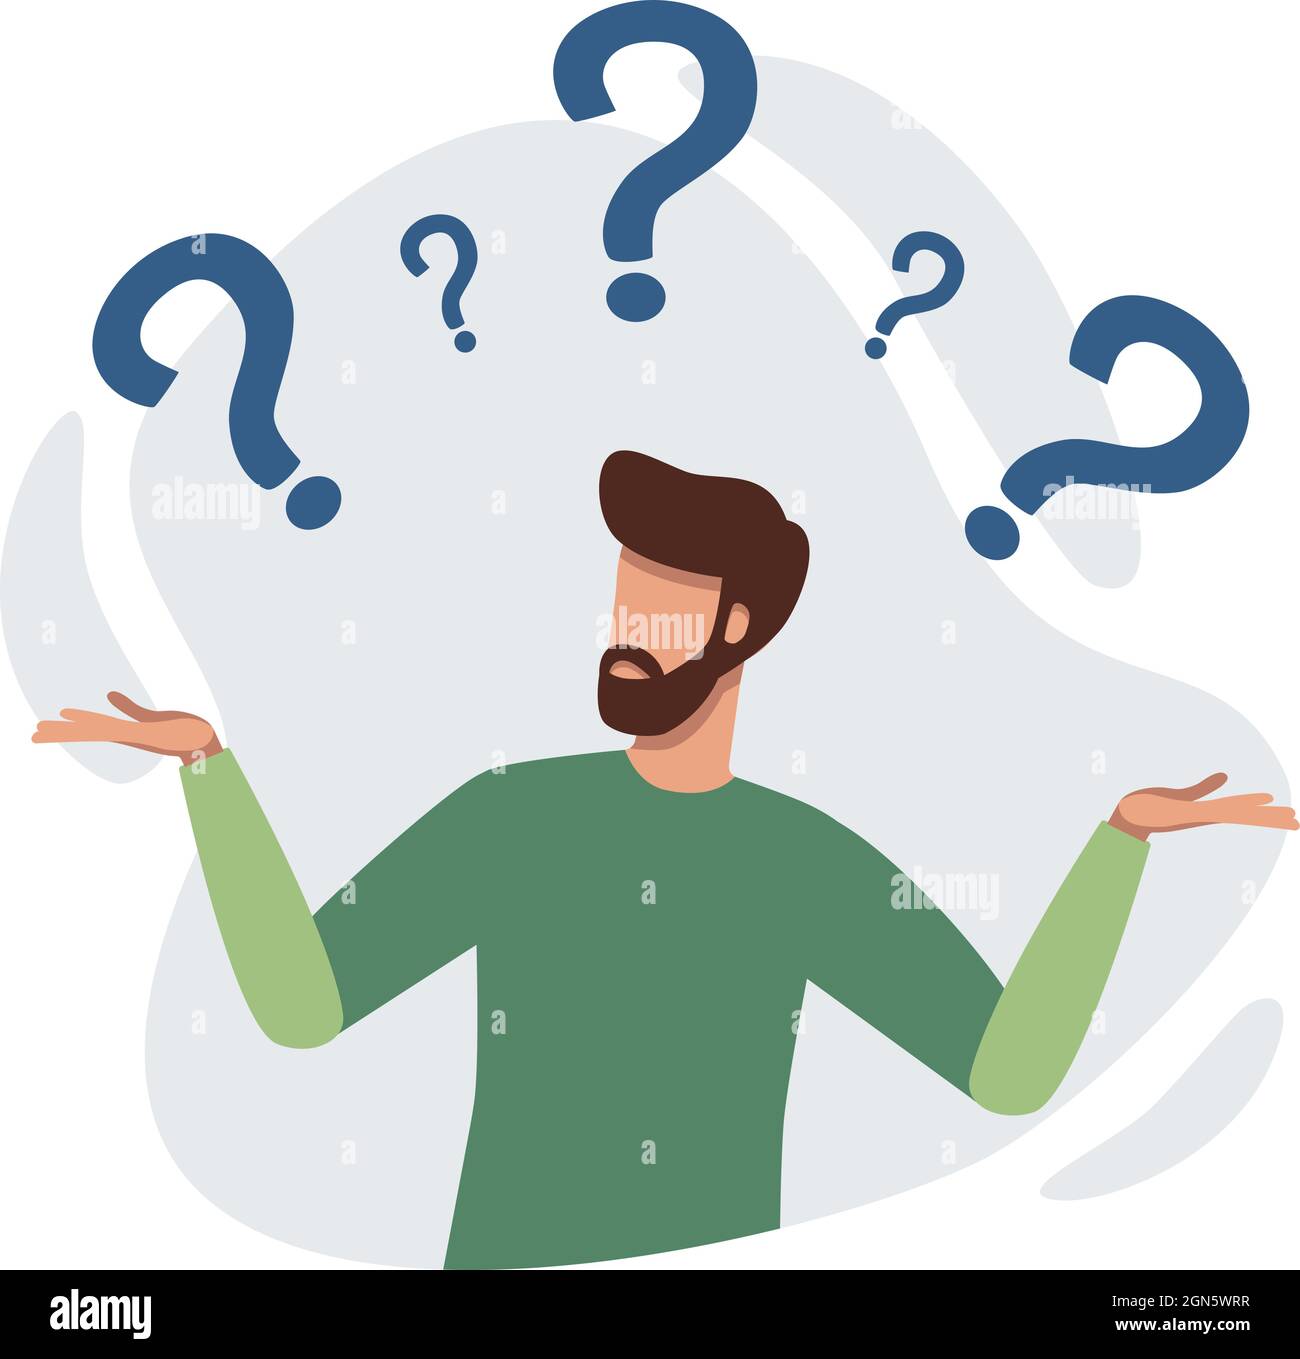 Confused person surrounded by question marks Stock Vector